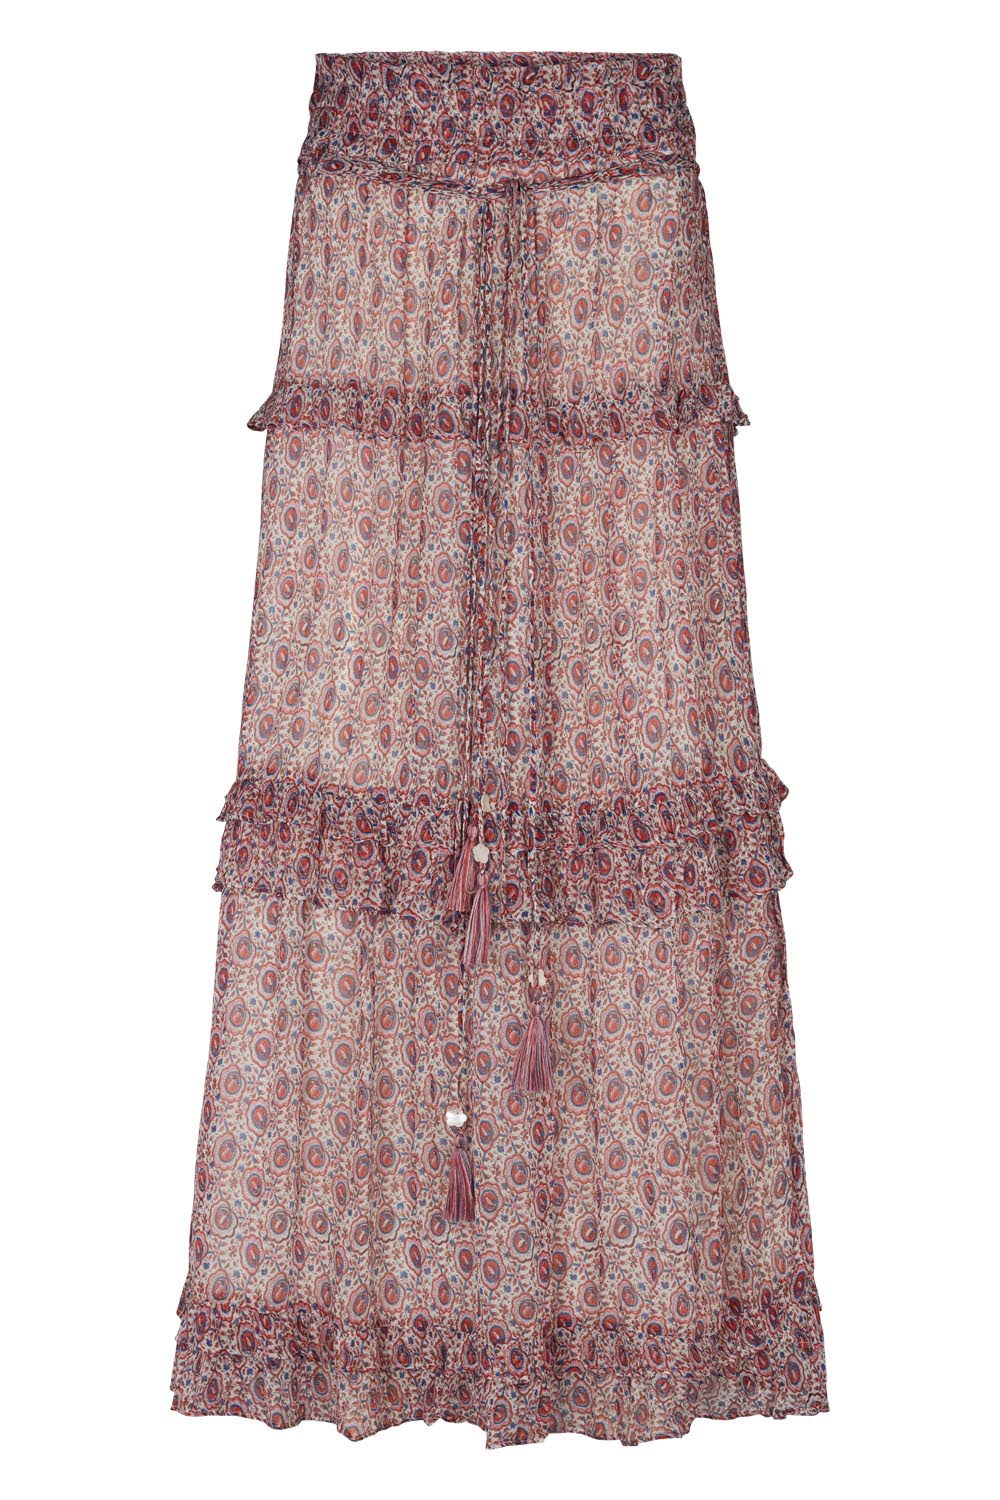 Maxi skirt in dusky pink with floral print with elasticated waist and tie belt with tassel  and ruffle details